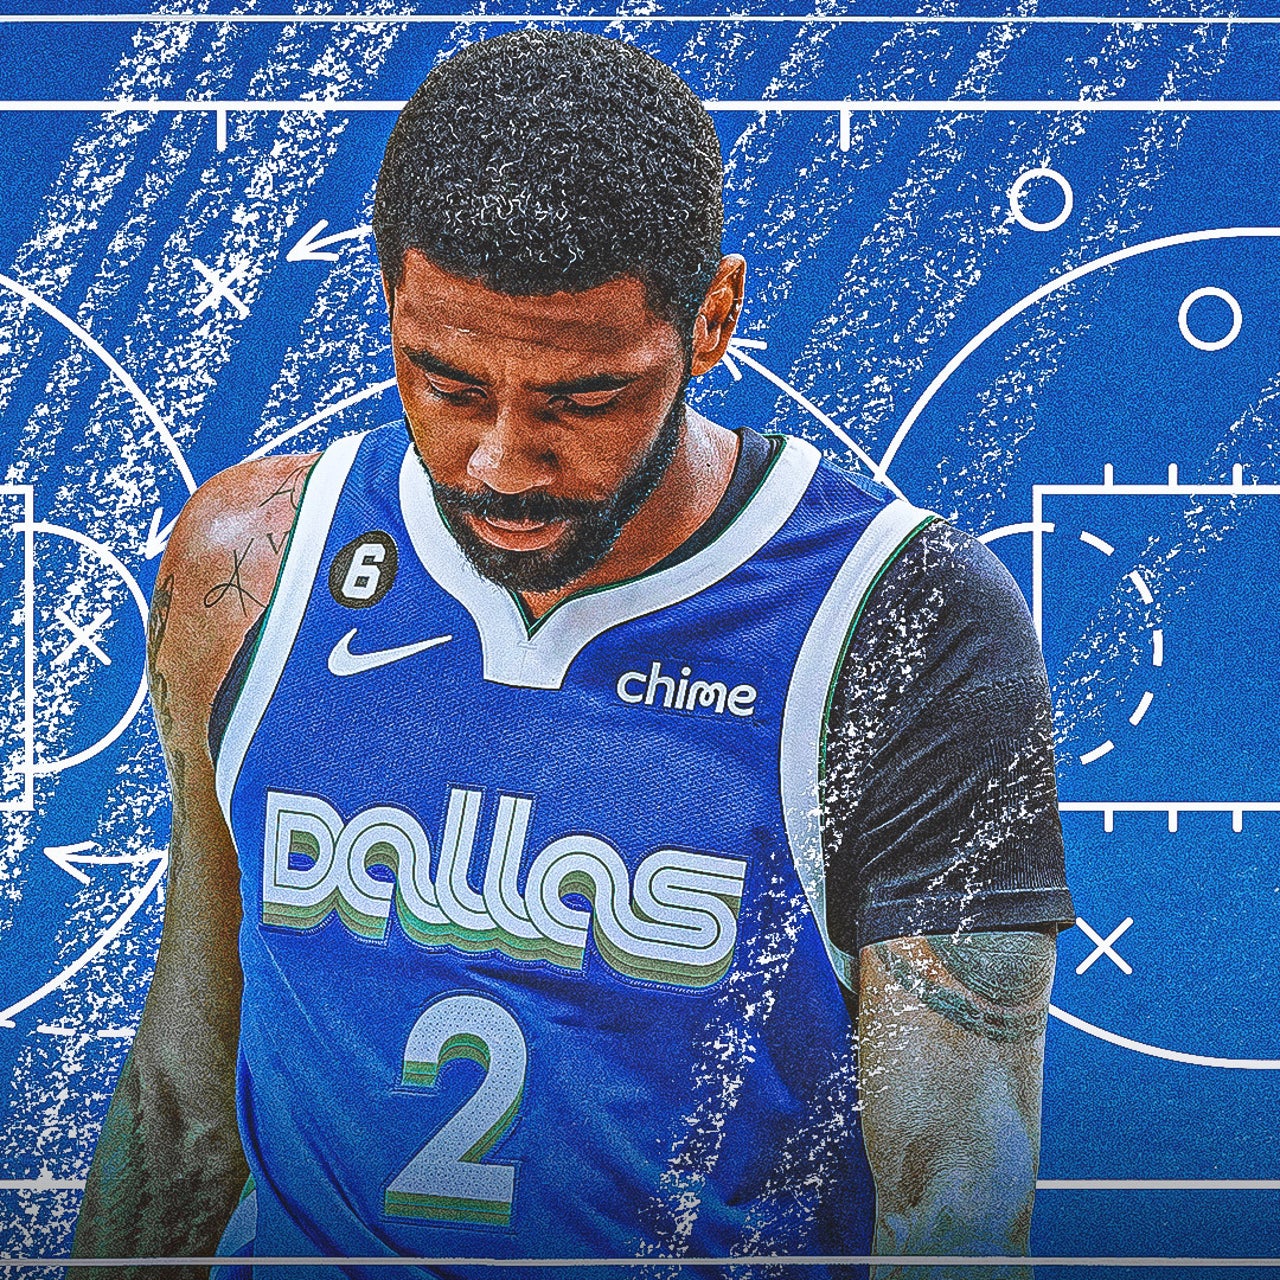 Irving debuts in Dallas not wanting to talk about future